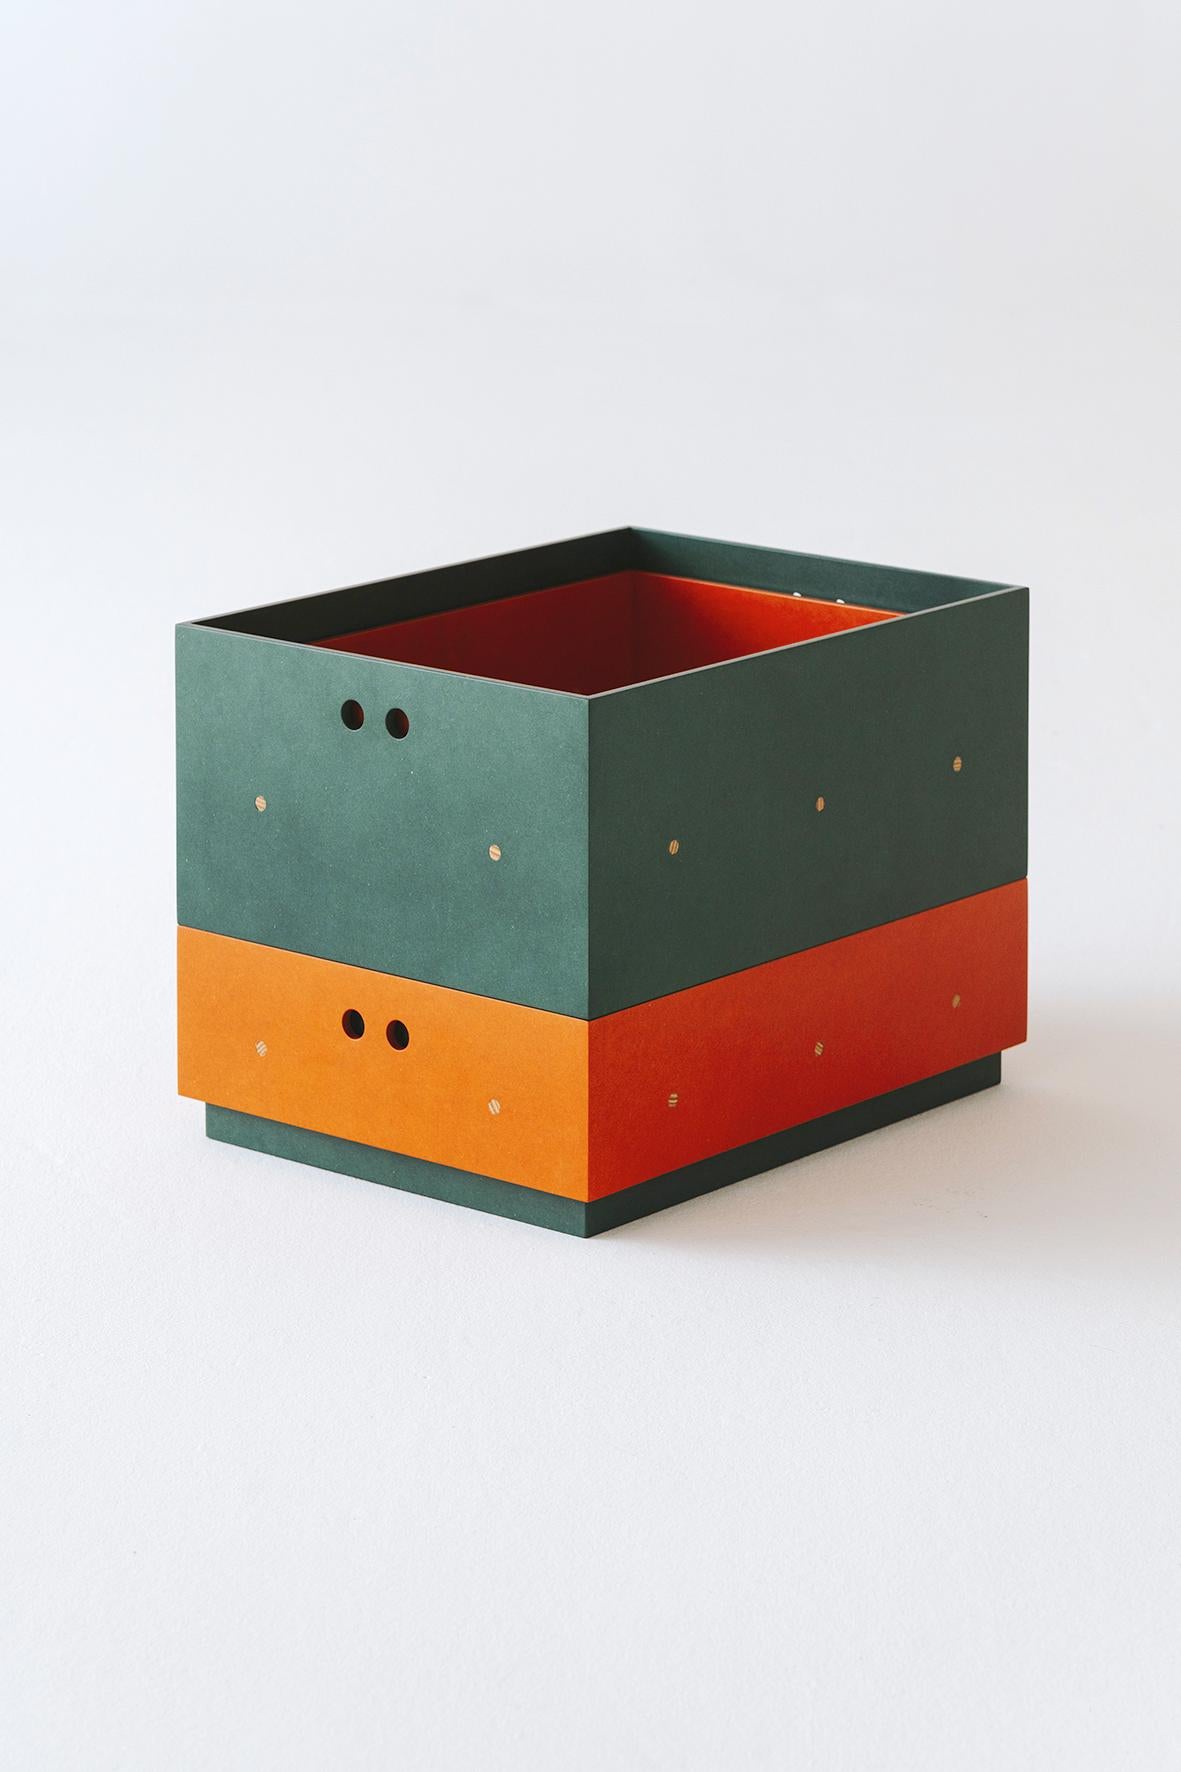 Olmo are a pair of stackable boxes with 2 different heights. They are made with different layers of MDF and plywood, what creates a light and resistant structure that allow them to stack them.

The 2 different colors of the boxes help to